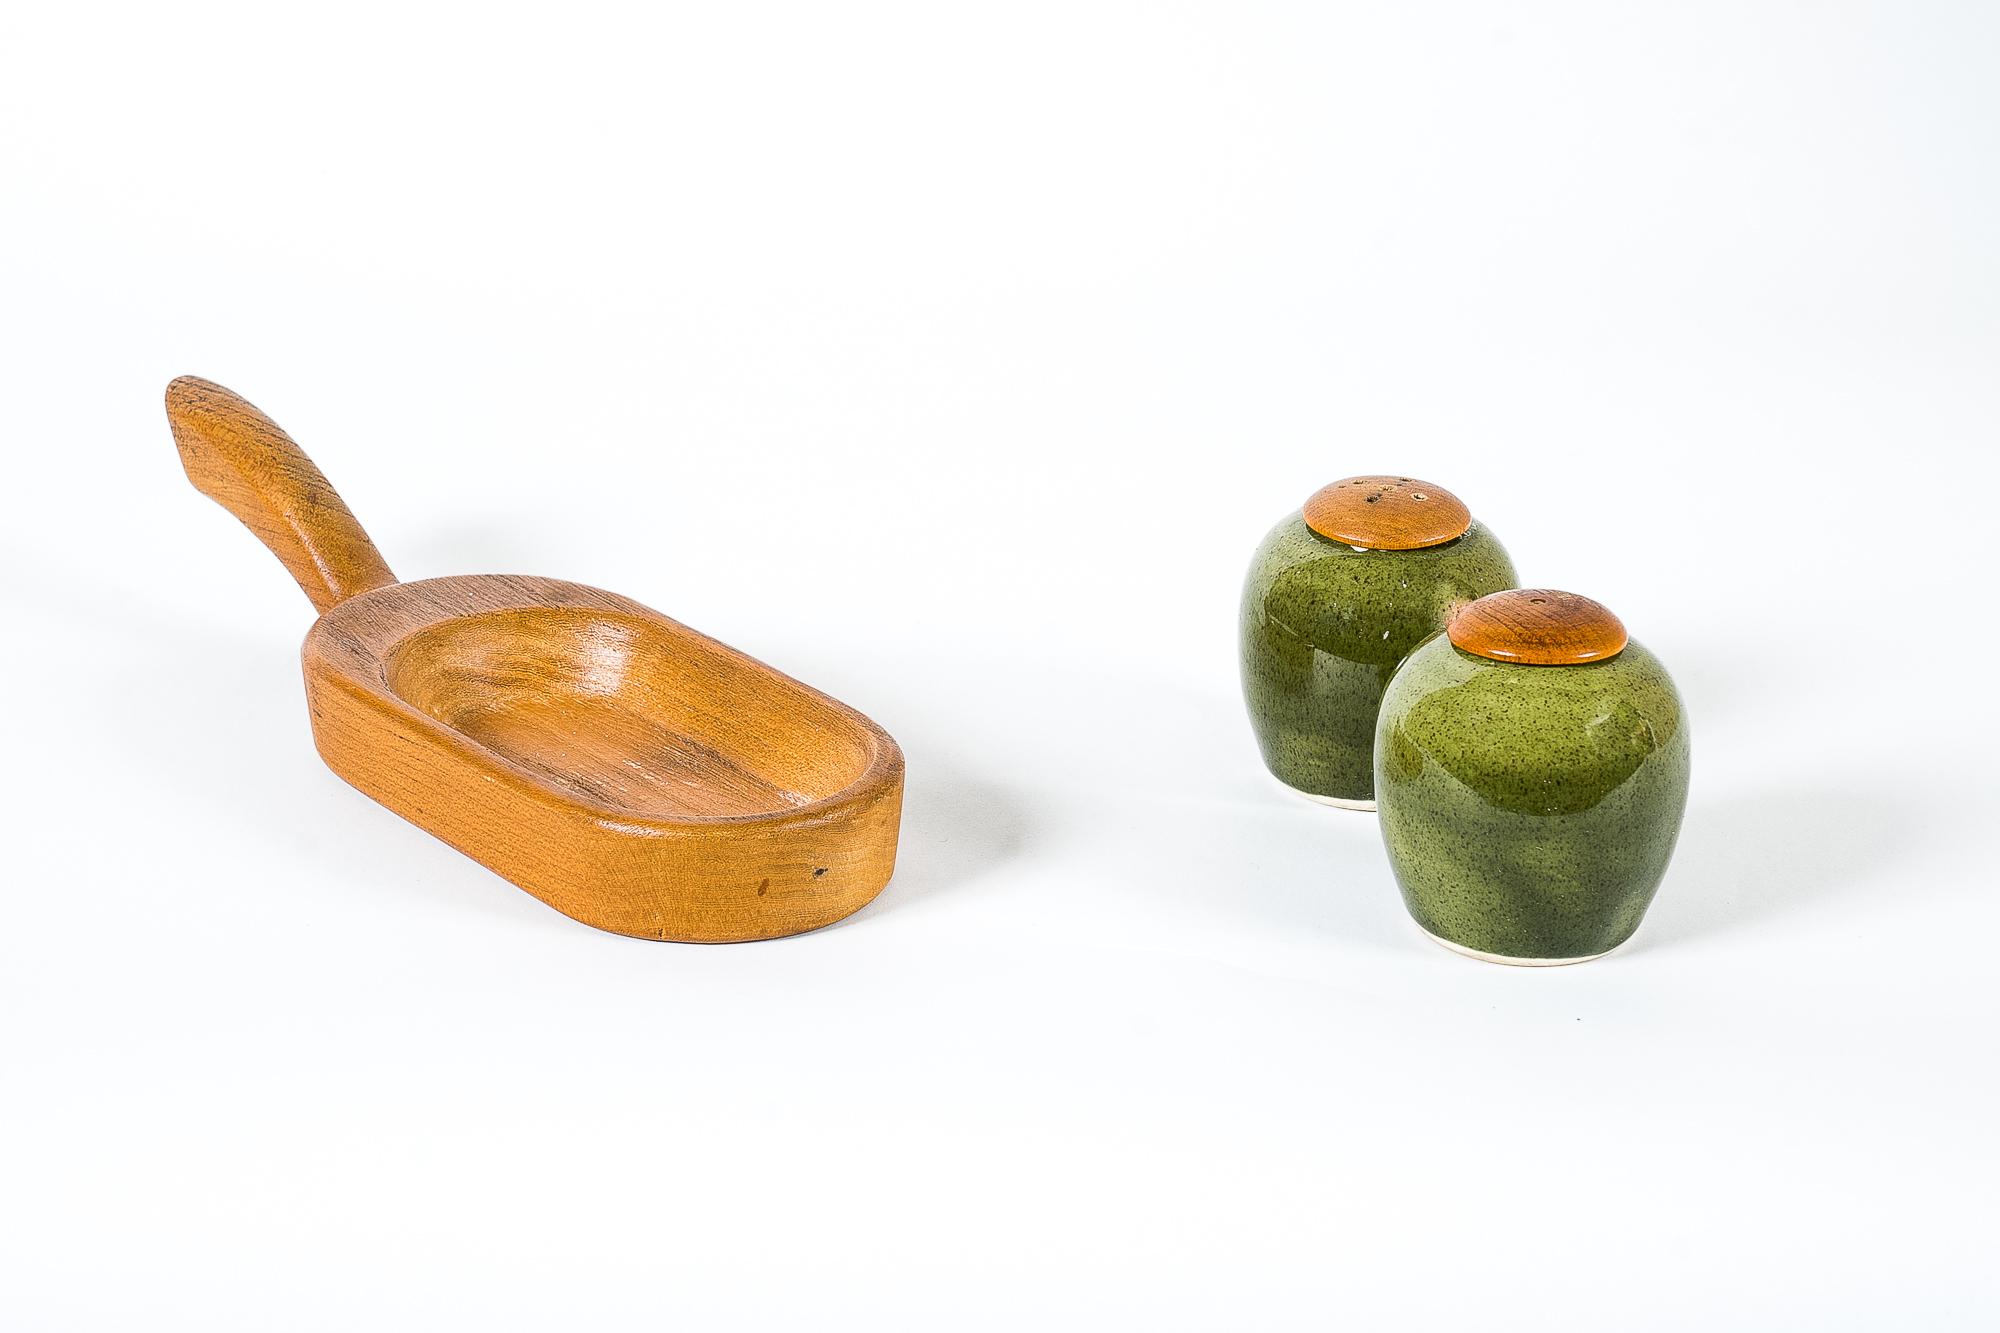 Salt and Pepper Shaker with Stand in Teakwood and Ceramic, Around 1960s For Sale 2